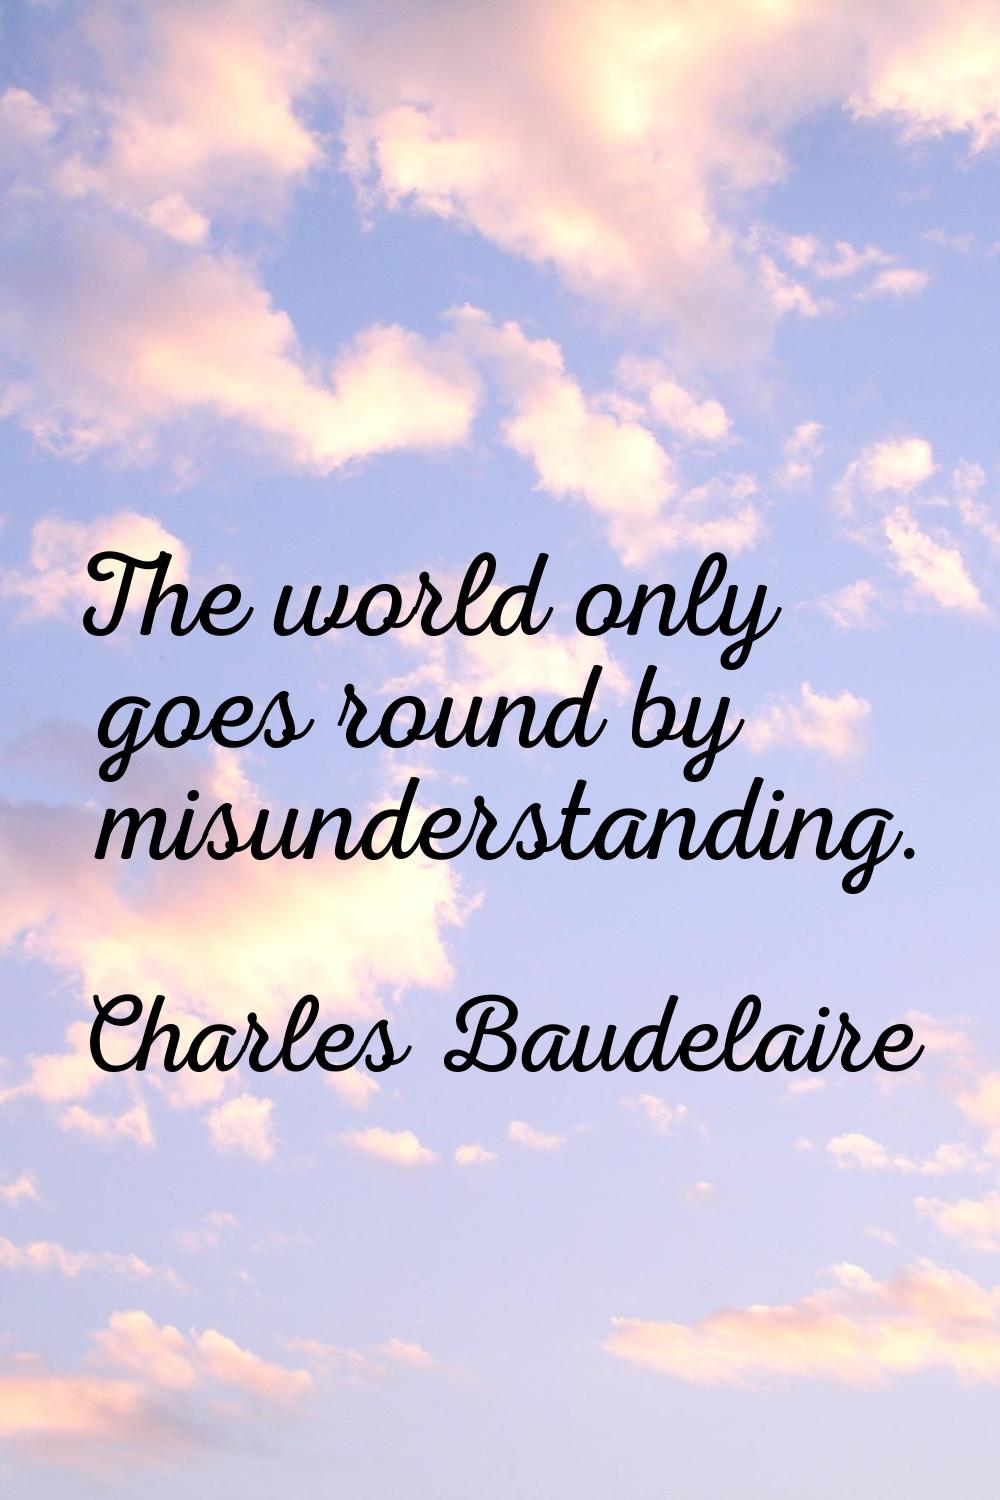 The world only goes round by misunderstanding.